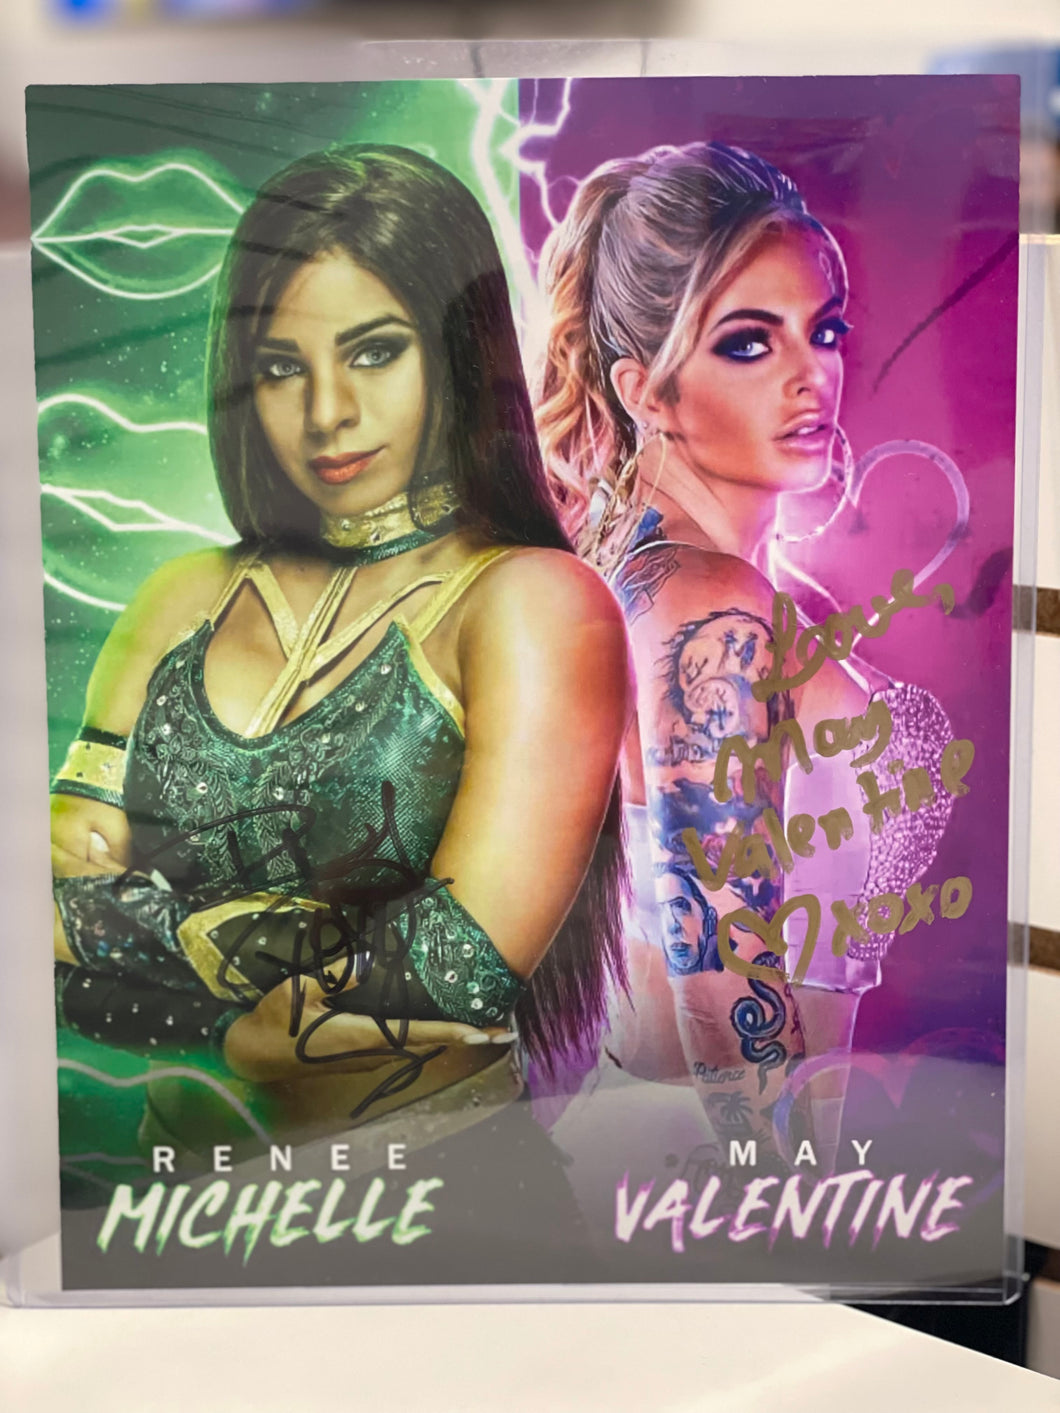 Autographed 8x10 Renee Michelle & May Valentine with toploader